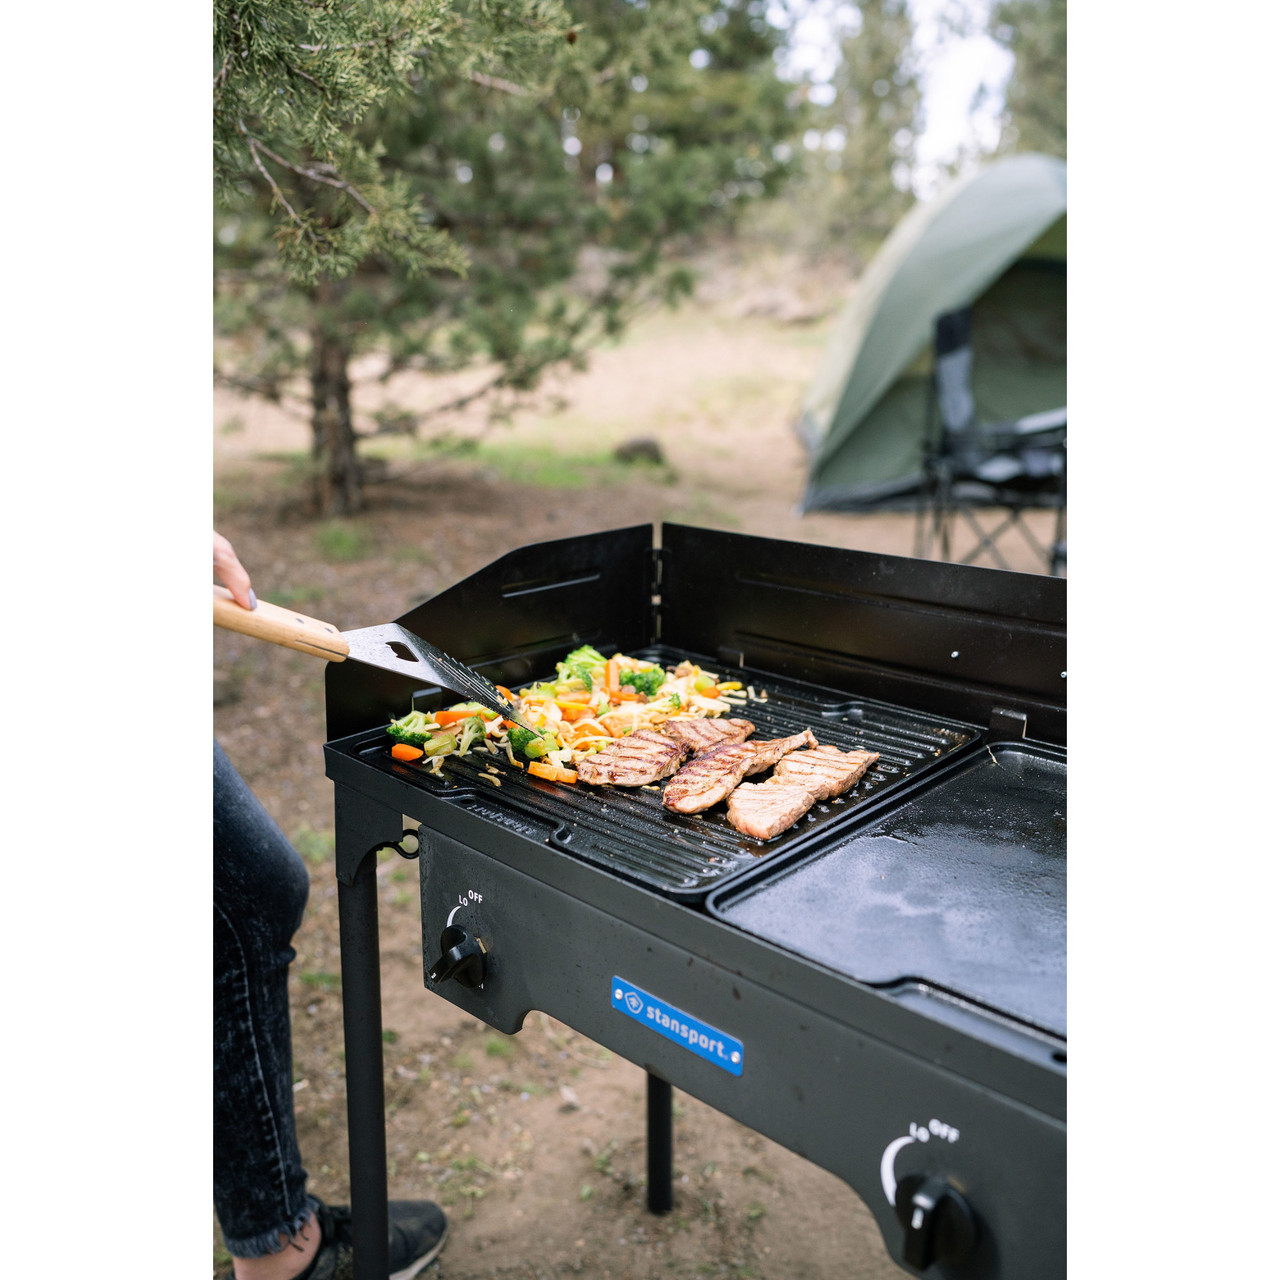 LARGE CAST IRON GRIDDLE. …, Outdoors and Sporting